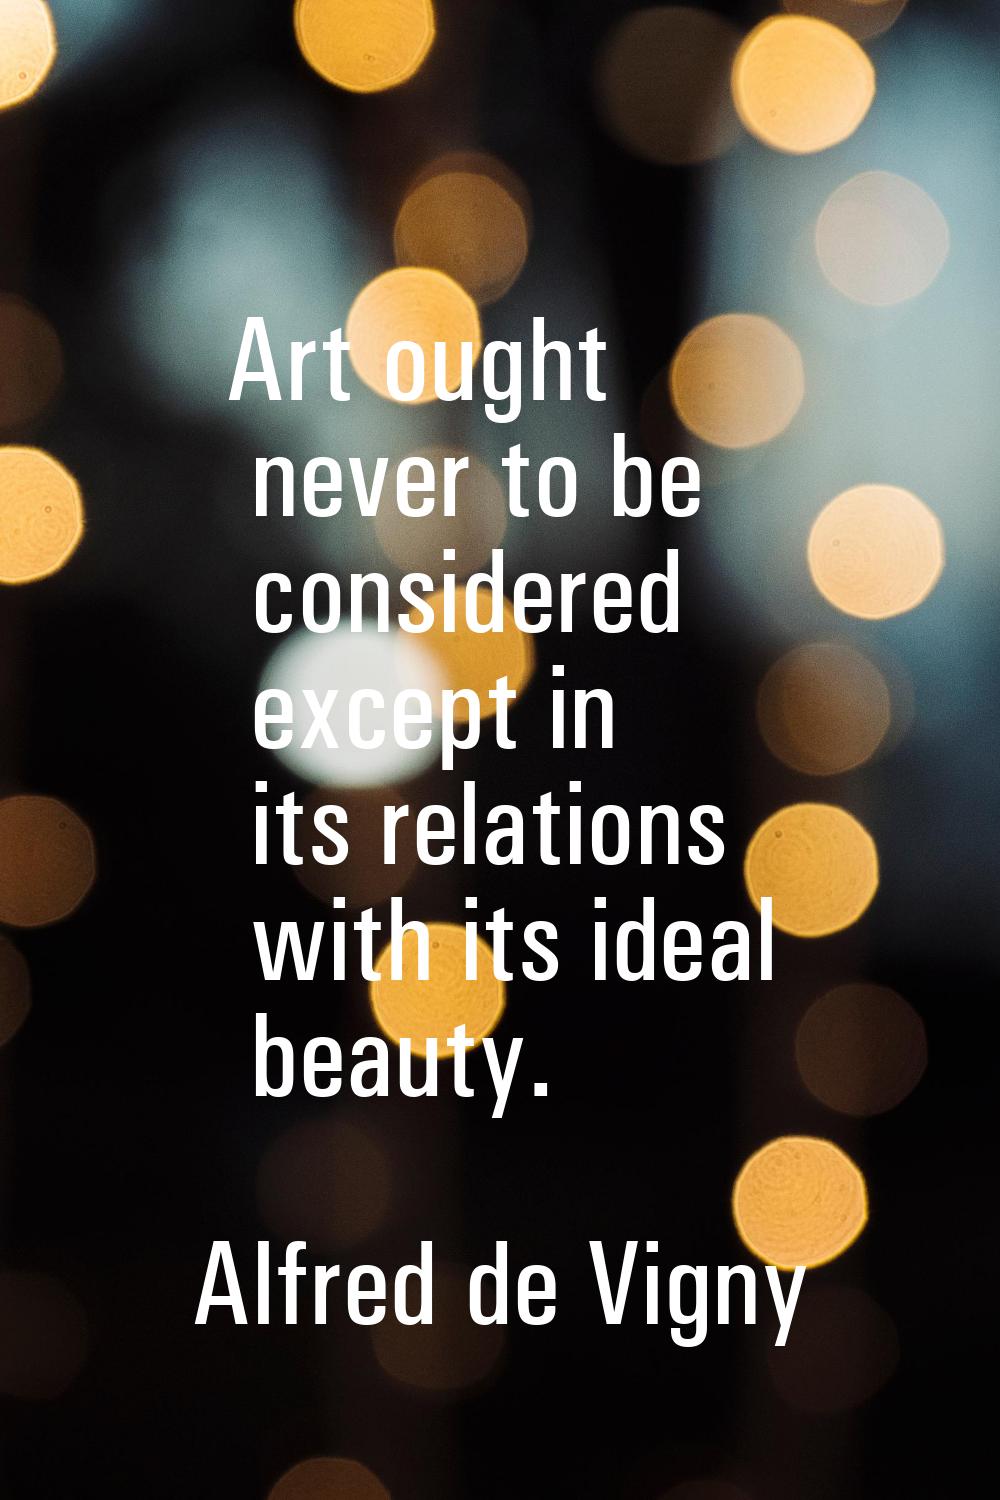 Art ought never to be considered except in its relations with its ideal beauty.